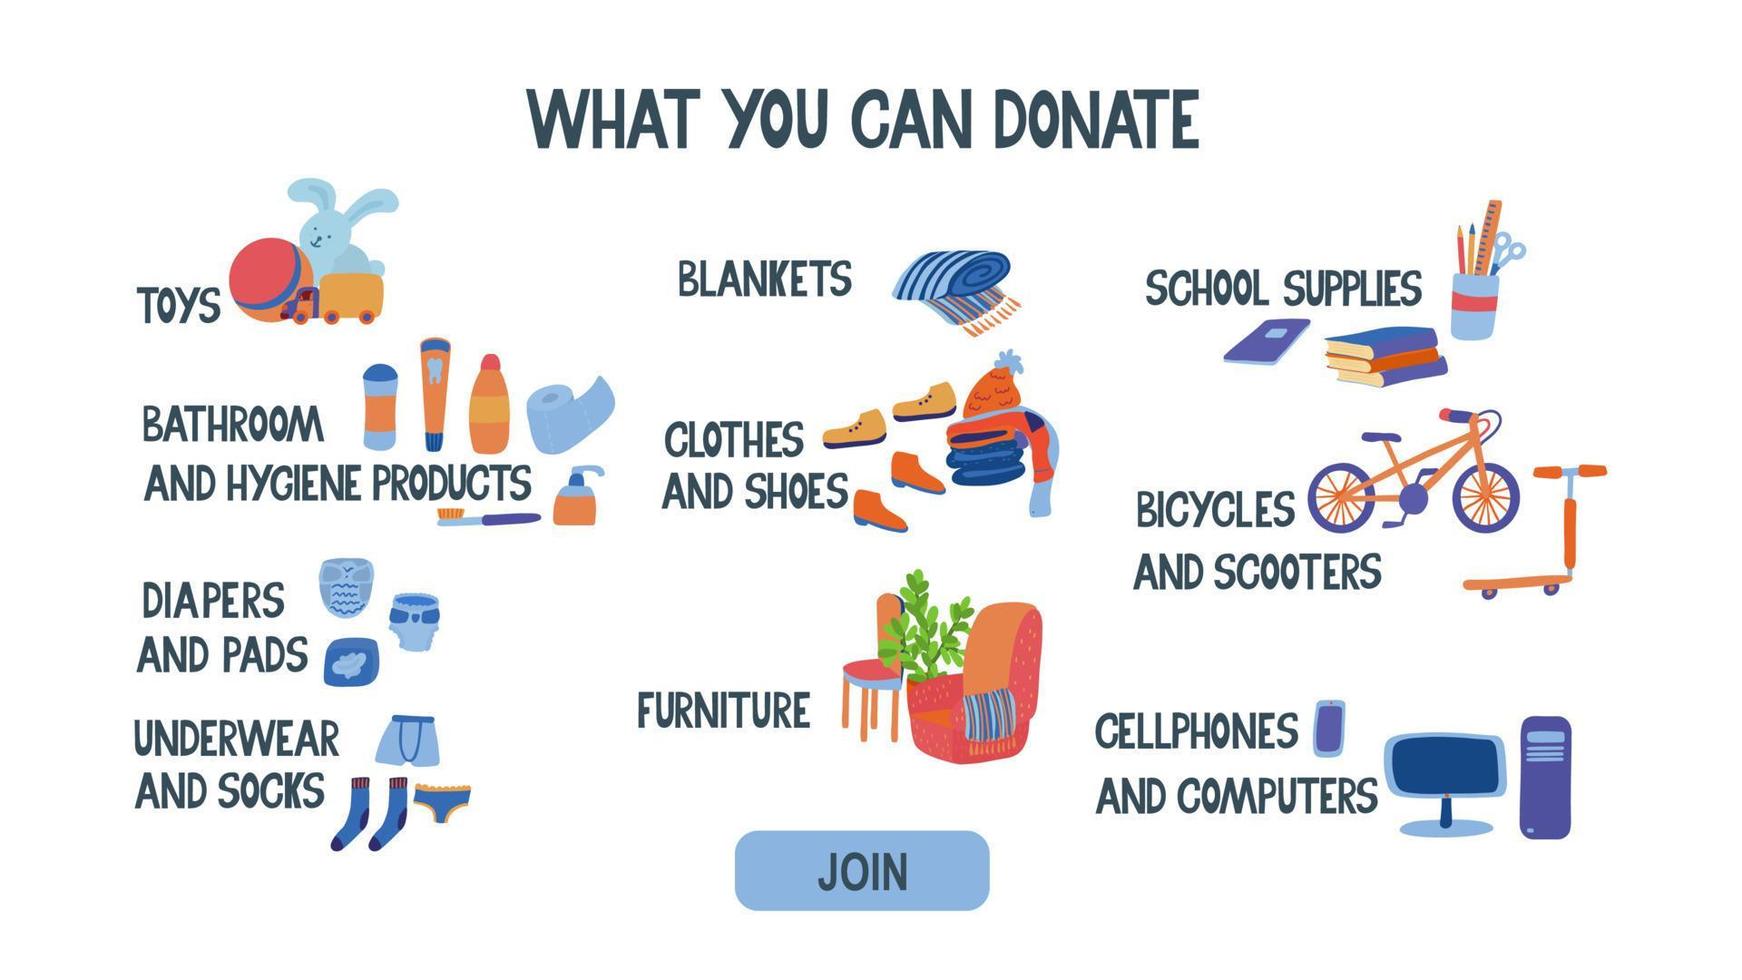 What you can donate. List of items with pictures for charity. There are clothes, furniture, computer, books, bike, scooter, hygiene items, stationery, toys. Hand drawn illustration and lettering. vector